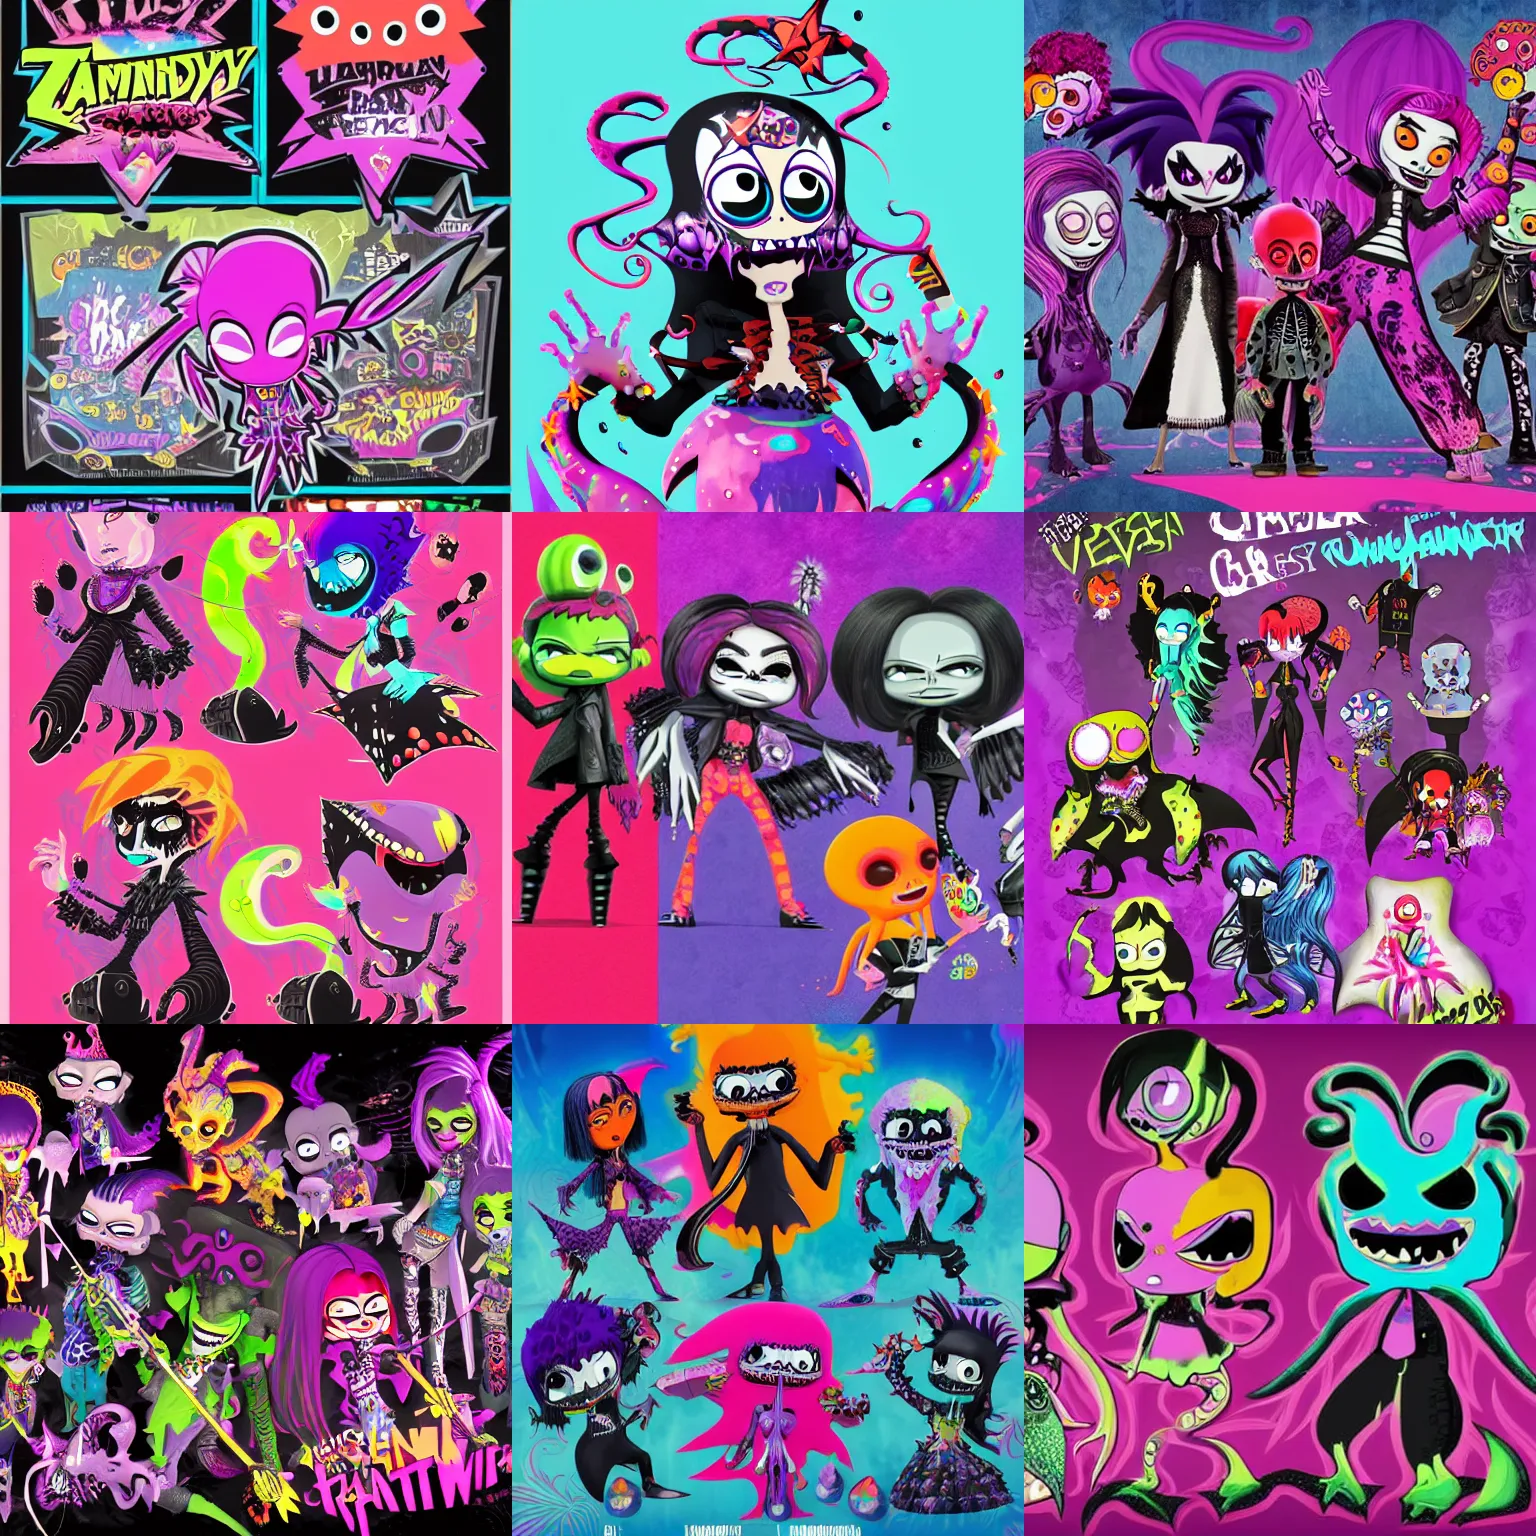 Prompt: lisa frank gothic punk vampiric rockstar vampire squid concept character designs of various shapes and sizes by genndy tartakovsky and the creators of fret nice at pieces interactive and splatoon by nintendo for the new hotel transylvania film starring a vampire squid kraken monster